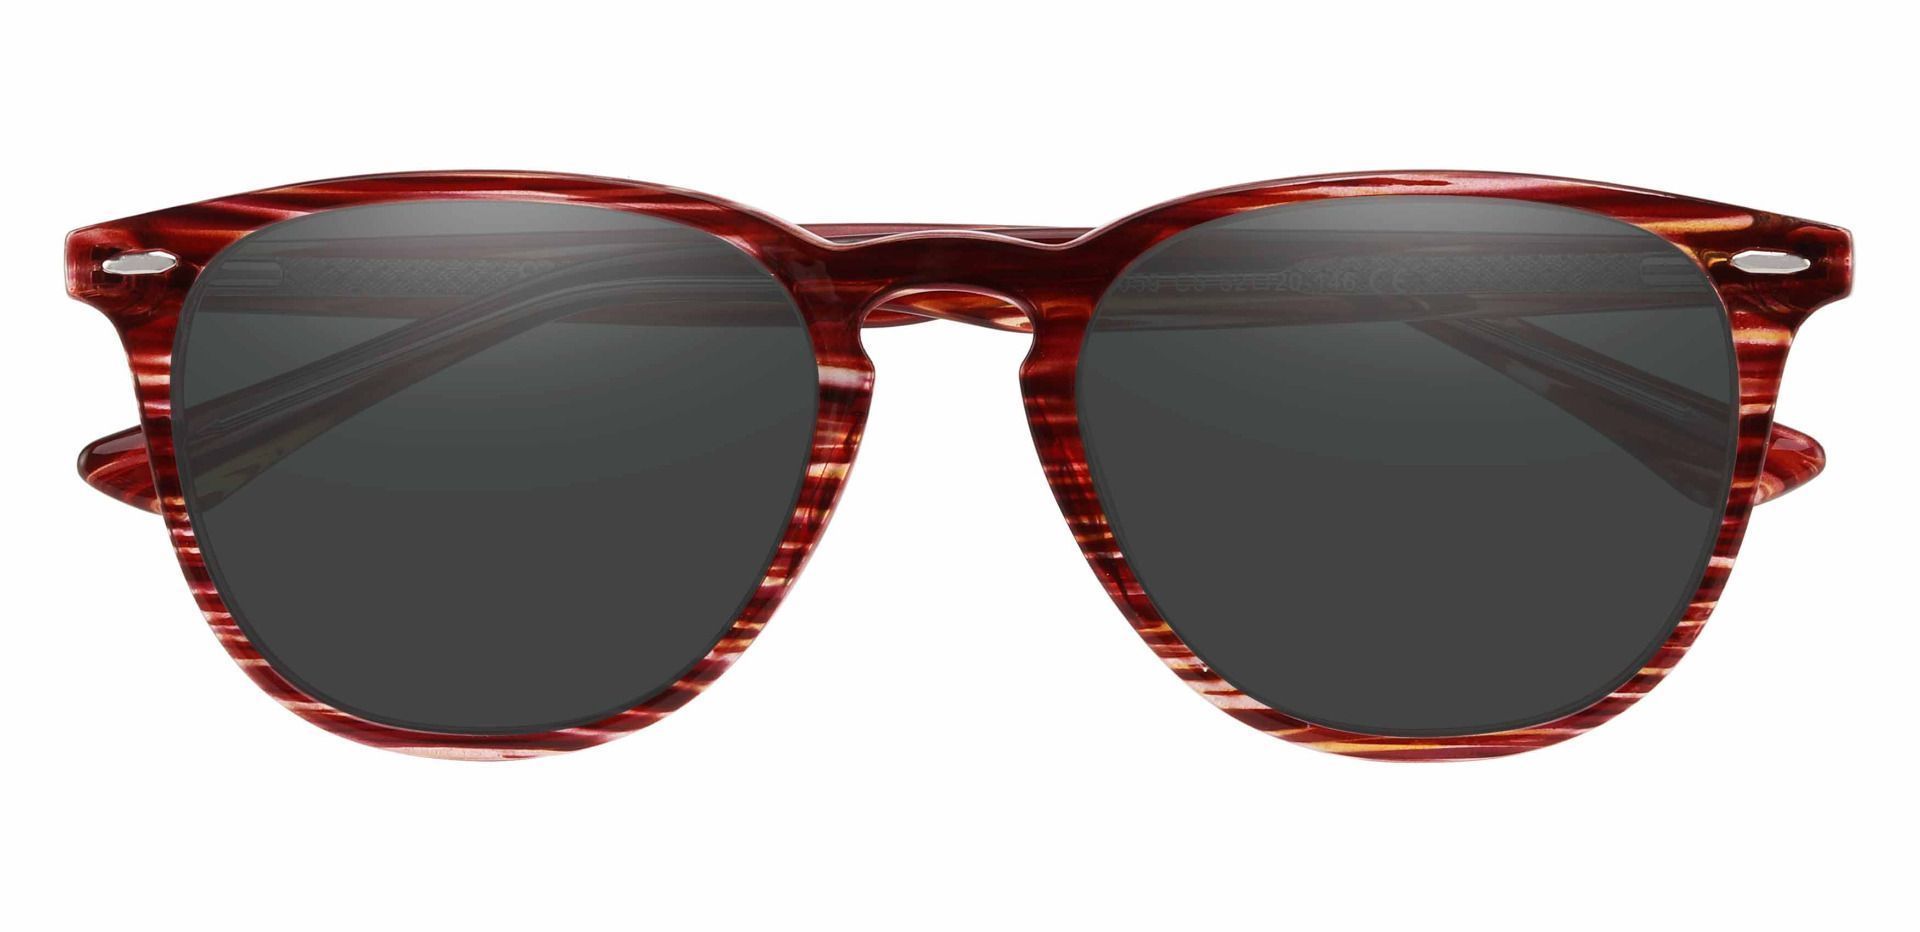 Sycamore Oval Prescription Sunglasses - Red Frame With Gray Lenses